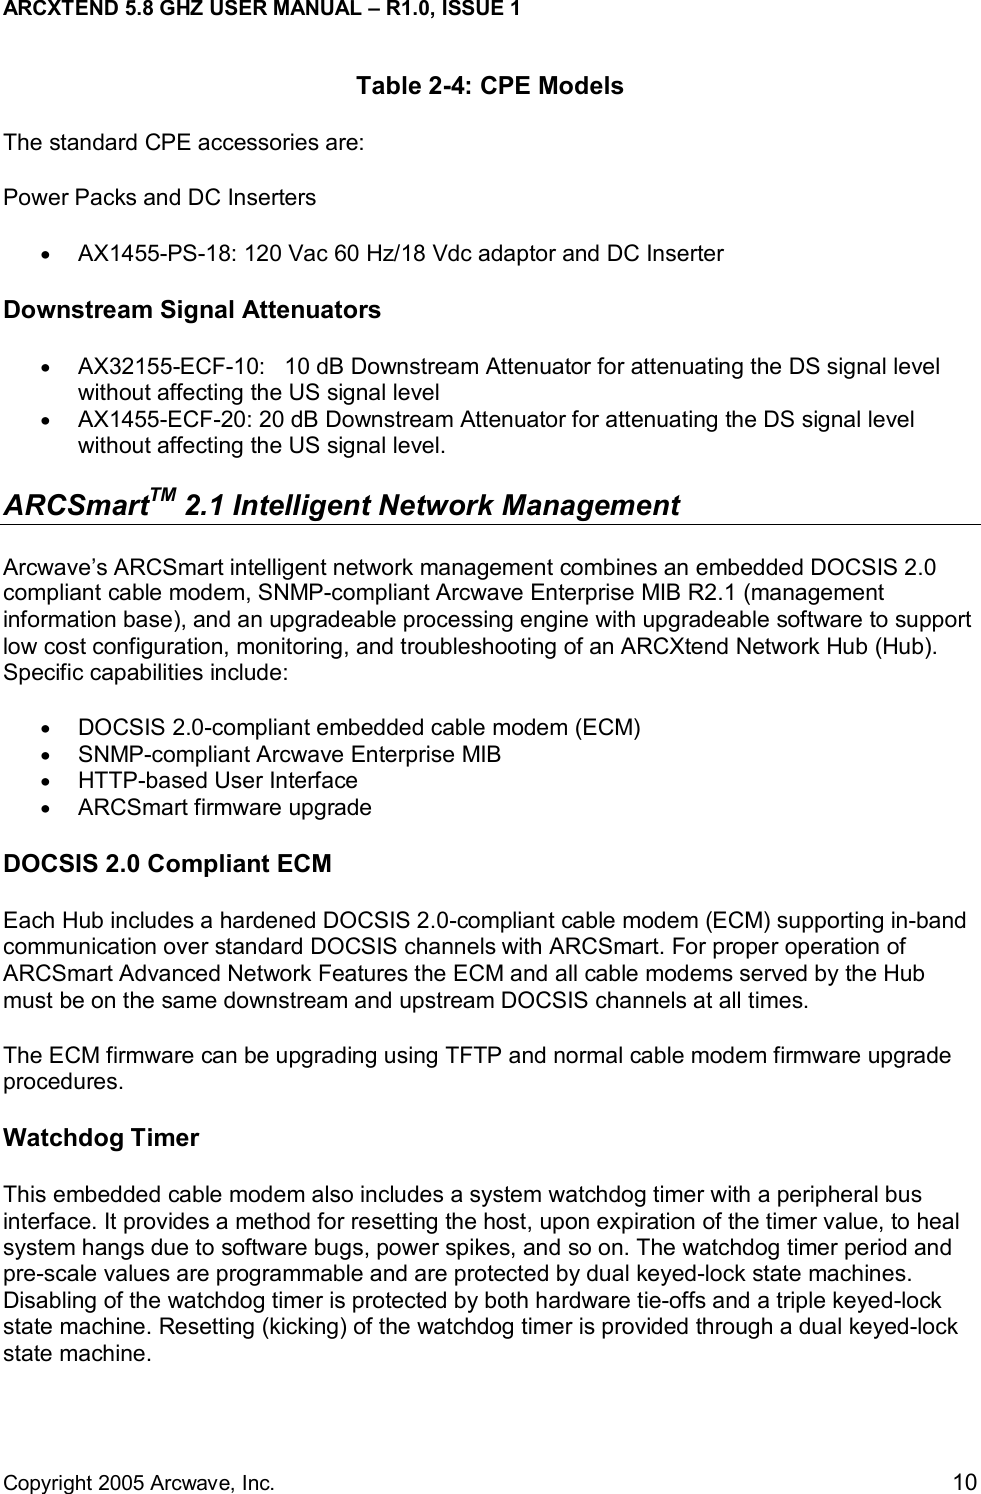 ARCXTEND 5.8 GHZ USER MANUAL – R1.0, ISSUE 1  Copyright 2005 Arcwave, Inc.    10 Table 2-4: CPE Models The standard CPE accessories are: Power Packs and DC Inserters •  AX1455-PS-18: 120 Vac 60 Hz/18 Vdc adaptor and DC Inserter Downstream Signal Attenuators •  AX32155-ECF-10:   10 dB Downstream Attenuator for attenuating the DS signal level without affecting the US signal level •  AX1455-ECF-20: 20 dB Downstream Attenuator for attenuating the DS signal level without affecting the US signal level. ARCSmartTM 2.1 Intelligent Network Management  Arcwave’s ARCSmart intelligent network management combines an embedded DOCSIS 2.0 compliant cable modem, SNMP-compliant Arcwave Enterprise MIB R2.1 (management information base), and an upgradeable processing engine with upgradeable software to support low cost configuration, monitoring, and troubleshooting of an ARCXtend Network Hub (Hub). Specific capabilities include: •  DOCSIS 2.0-compliant embedded cable modem (ECM) •  SNMP-compliant Arcwave Enterprise MIB •  HTTP-based User Interface •  ARCSmart firmware upgrade DOCSIS 2.0 Compliant ECM Each Hub includes a hardened DOCSIS 2.0-compliant cable modem (ECM) supporting in-band communication over standard DOCSIS channels with ARCSmart. For proper operation of ARCSmart Advanced Network Features the ECM and all cable modems served by the Hub must be on the same downstream and upstream DOCSIS channels at all times.  The ECM firmware can be upgrading using TFTP and normal cable modem firmware upgrade procedures.  Watchdog Timer This embedded cable modem also includes a system watchdog timer with a peripheral bus interface. It provides a method for resetting the host, upon expiration of the timer value, to heal system hangs due to software bugs, power spikes, and so on. The watchdog timer period and pre-scale values are programmable and are protected by dual keyed-lock state machines. Disabling of the watchdog timer is protected by both hardware tie-offs and a triple keyed-lock state machine. Resetting (kicking) of the watchdog timer is provided through a dual keyed-lock state machine. 